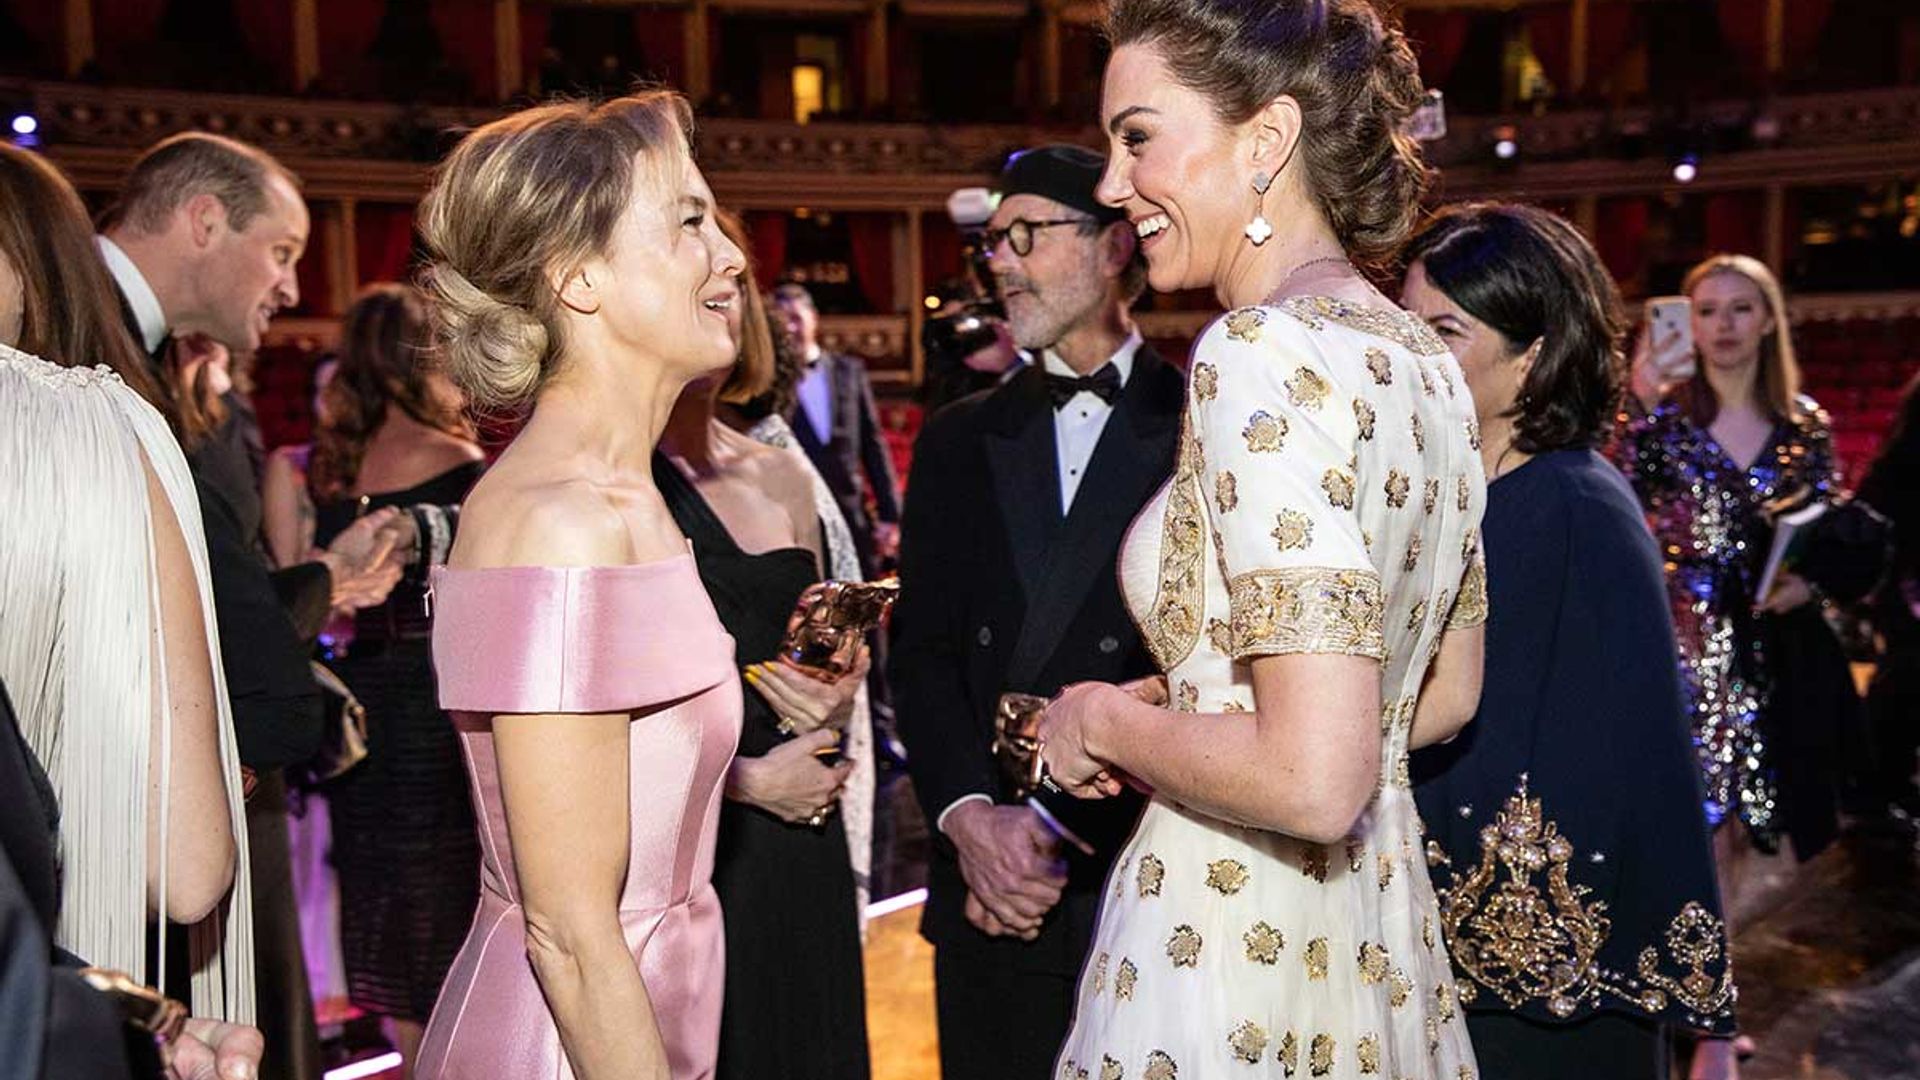 The stars Prince William and Kate Middleton met at the BAFTA Awards 2020